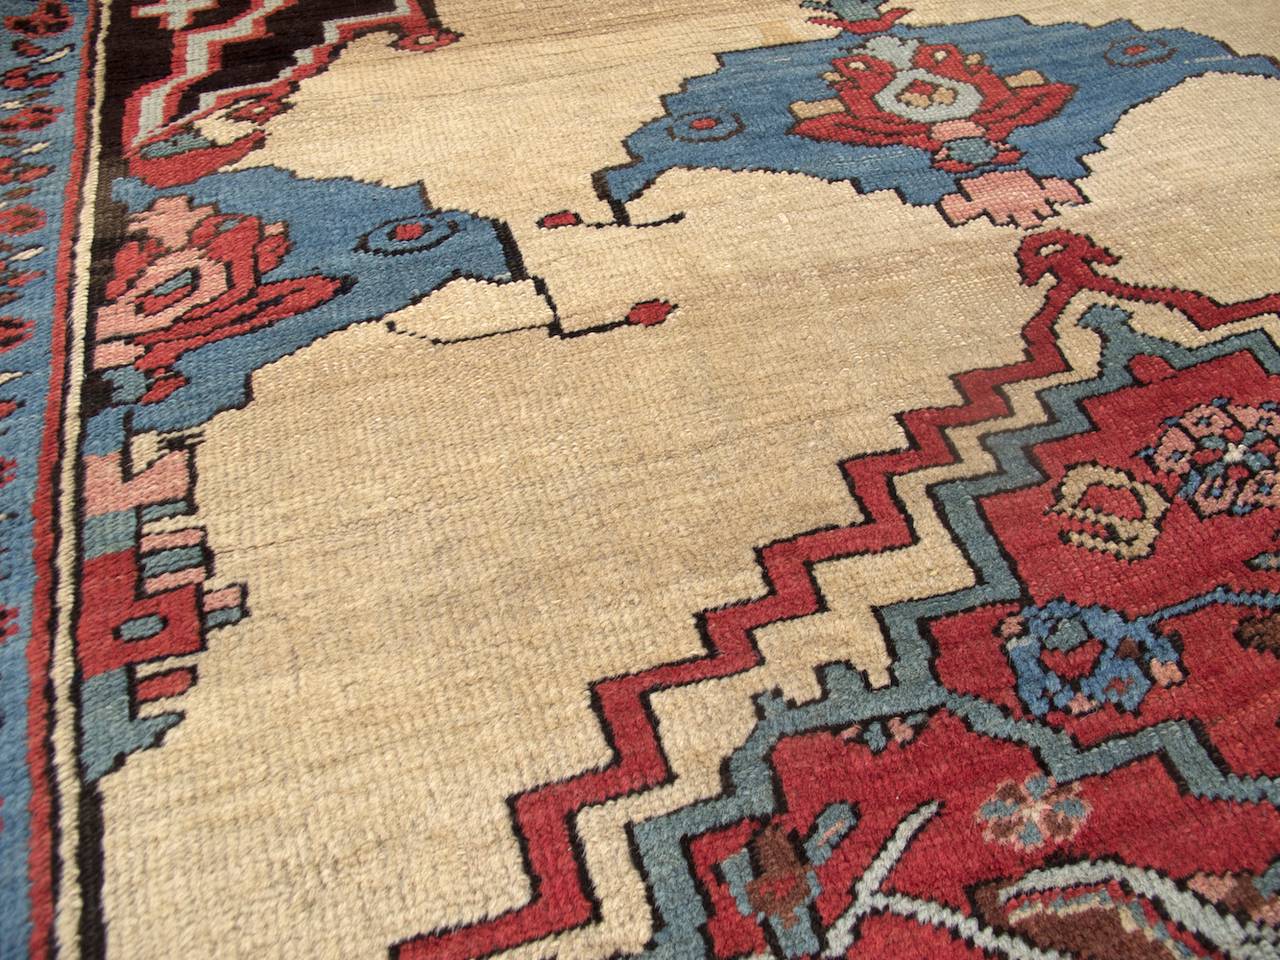 Bakhshaish carpets are arguably the most playful group of the more formal Northwest Persian varieties. This, however, does not preclude a proclivity for elegance. A Classic Persian medallion floats against a light modulated camel ground. Shades of